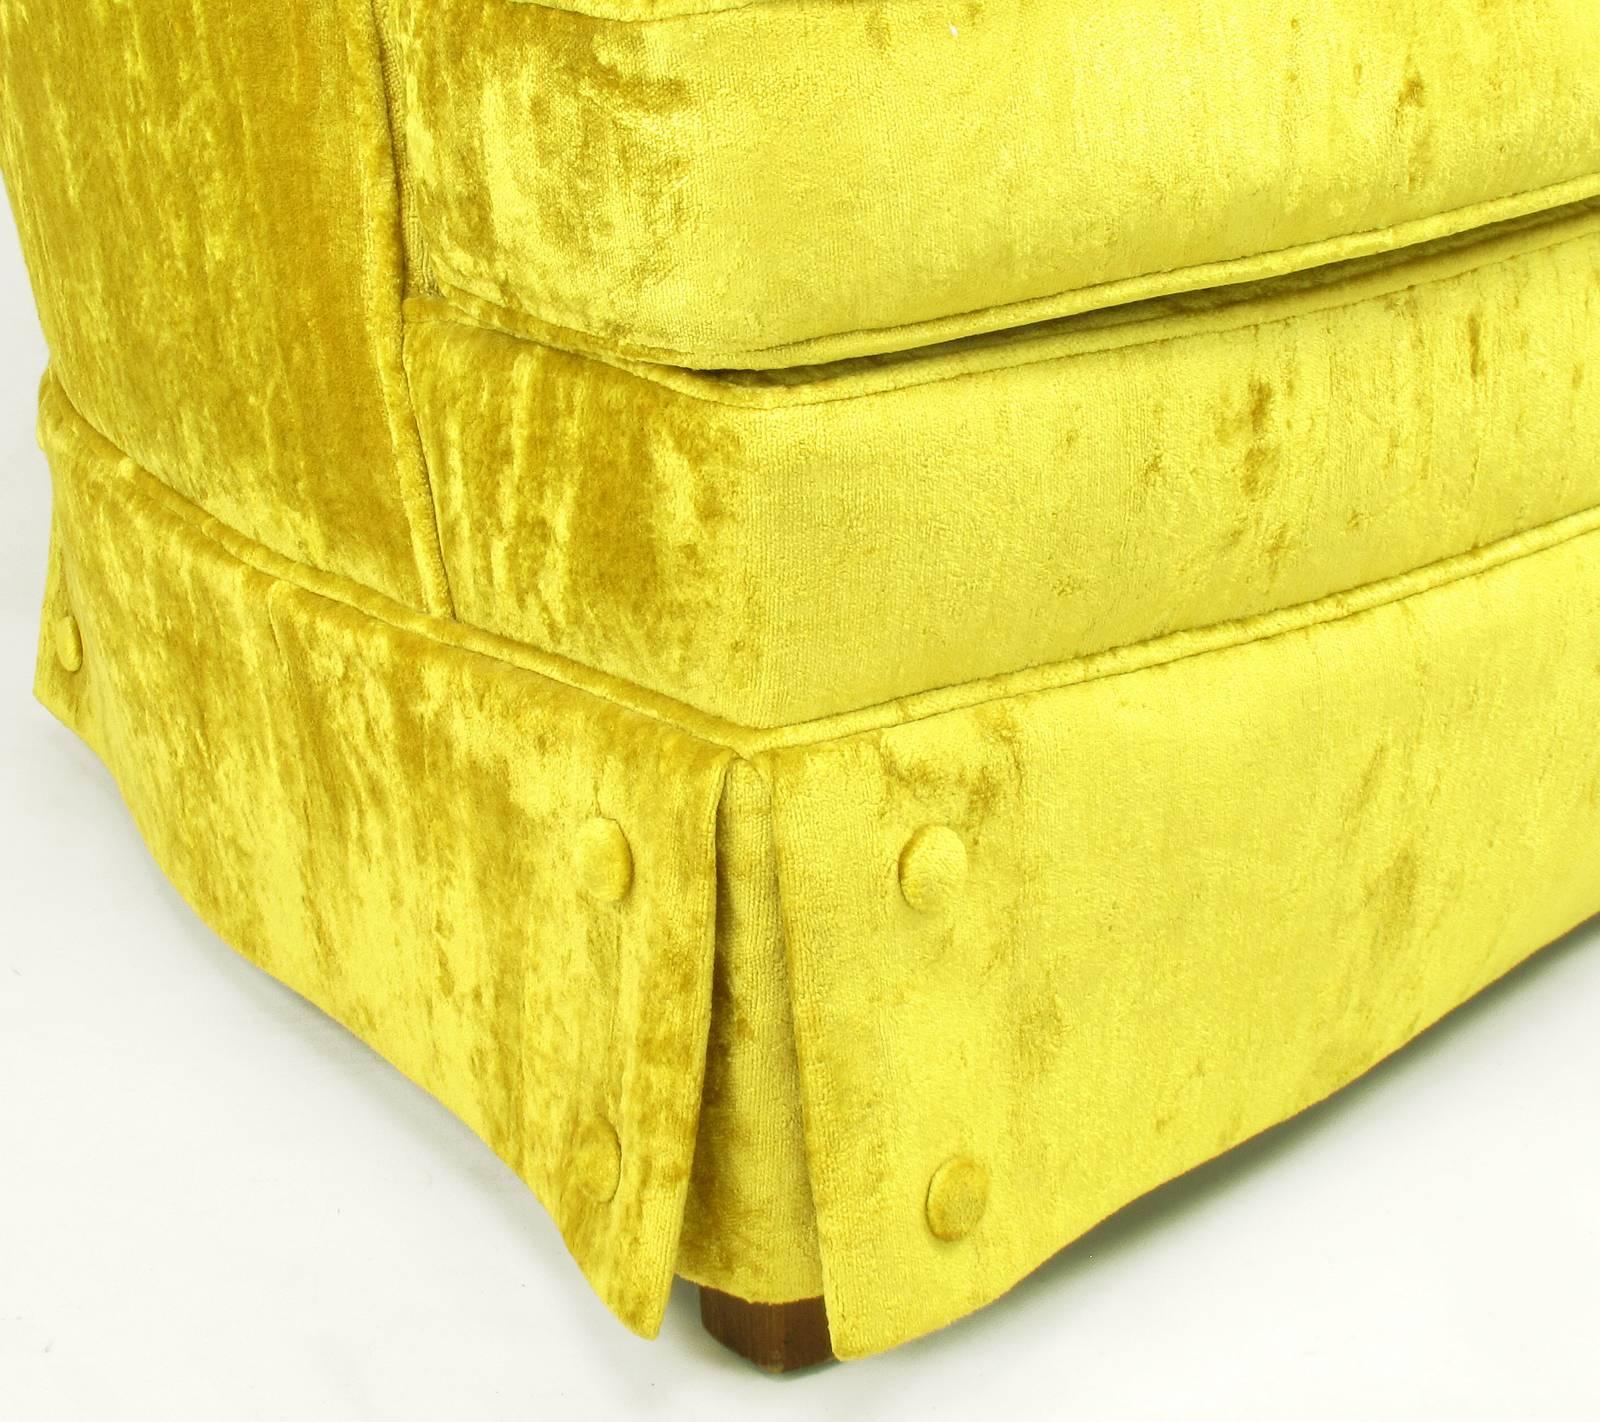 Tall Back Sinuous Lounge Chairs in Gold Crushed Velvet, circa 1960s In Excellent Condition For Sale In Chicago, IL